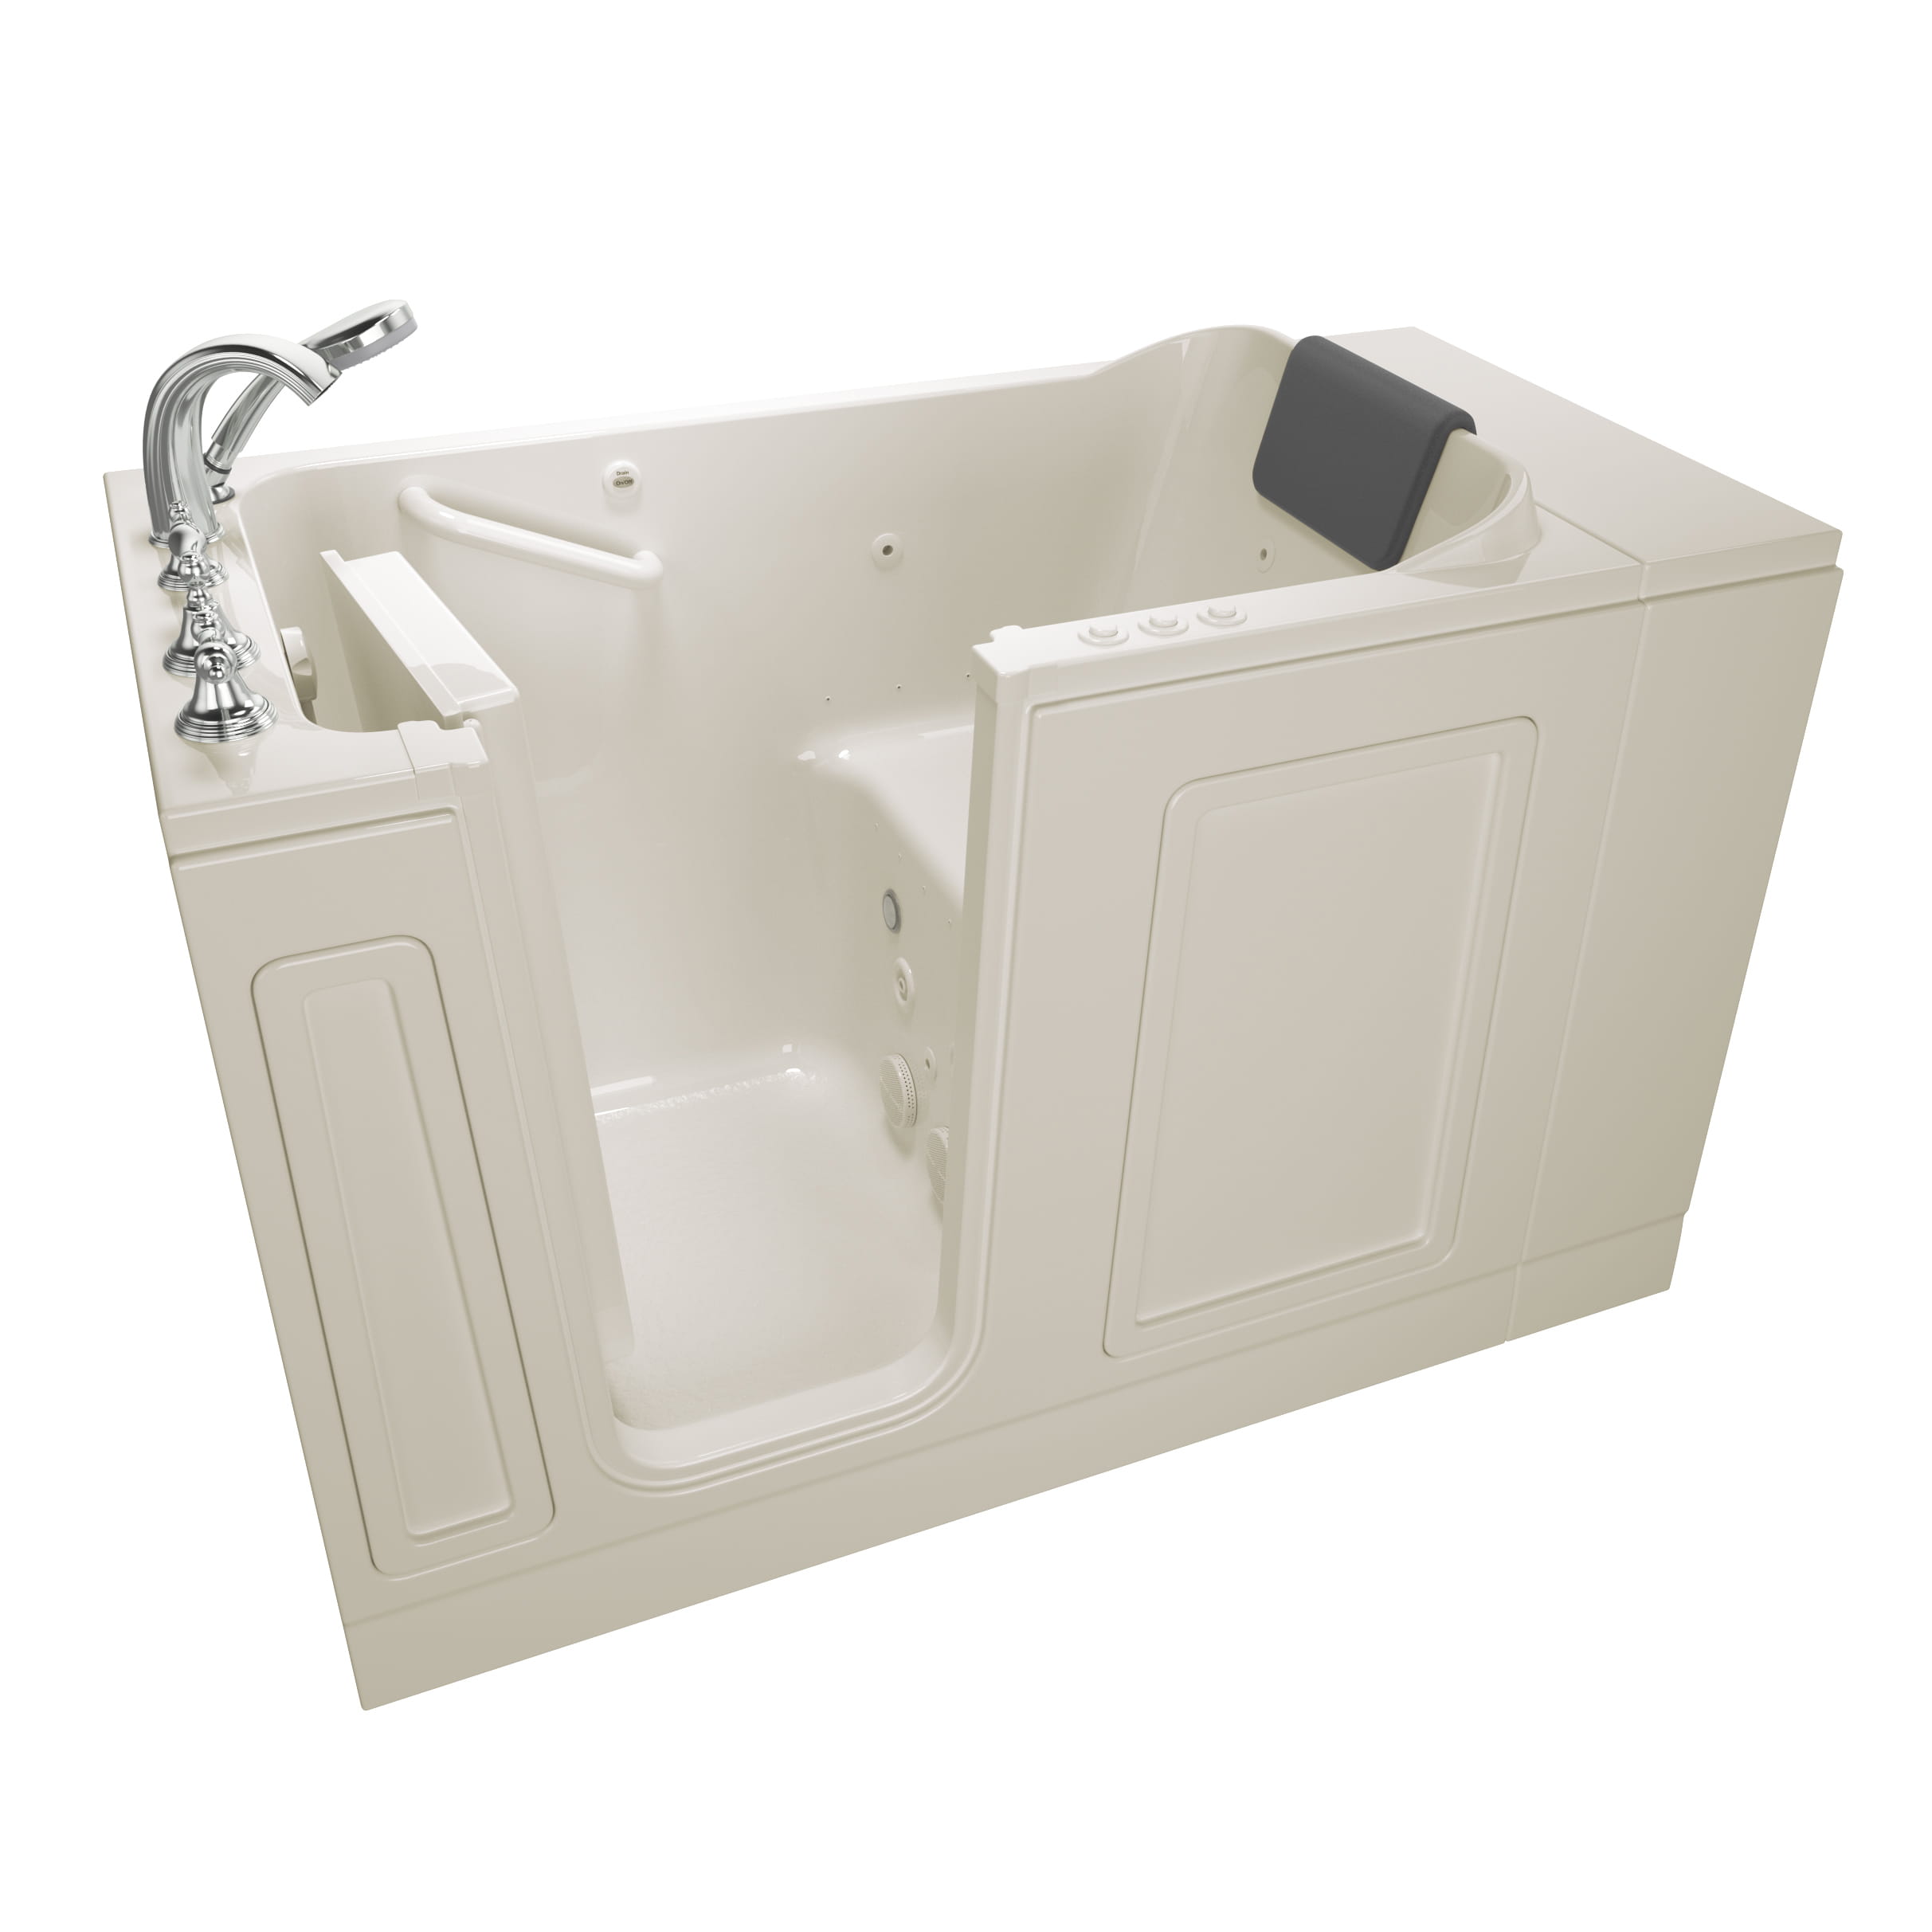 Acrylic Luxury Series 30 x 51 -Inch Walk-in Tub With Combination Air Spa and Whirlpool Systems - Left-Hand Drain With Faucet